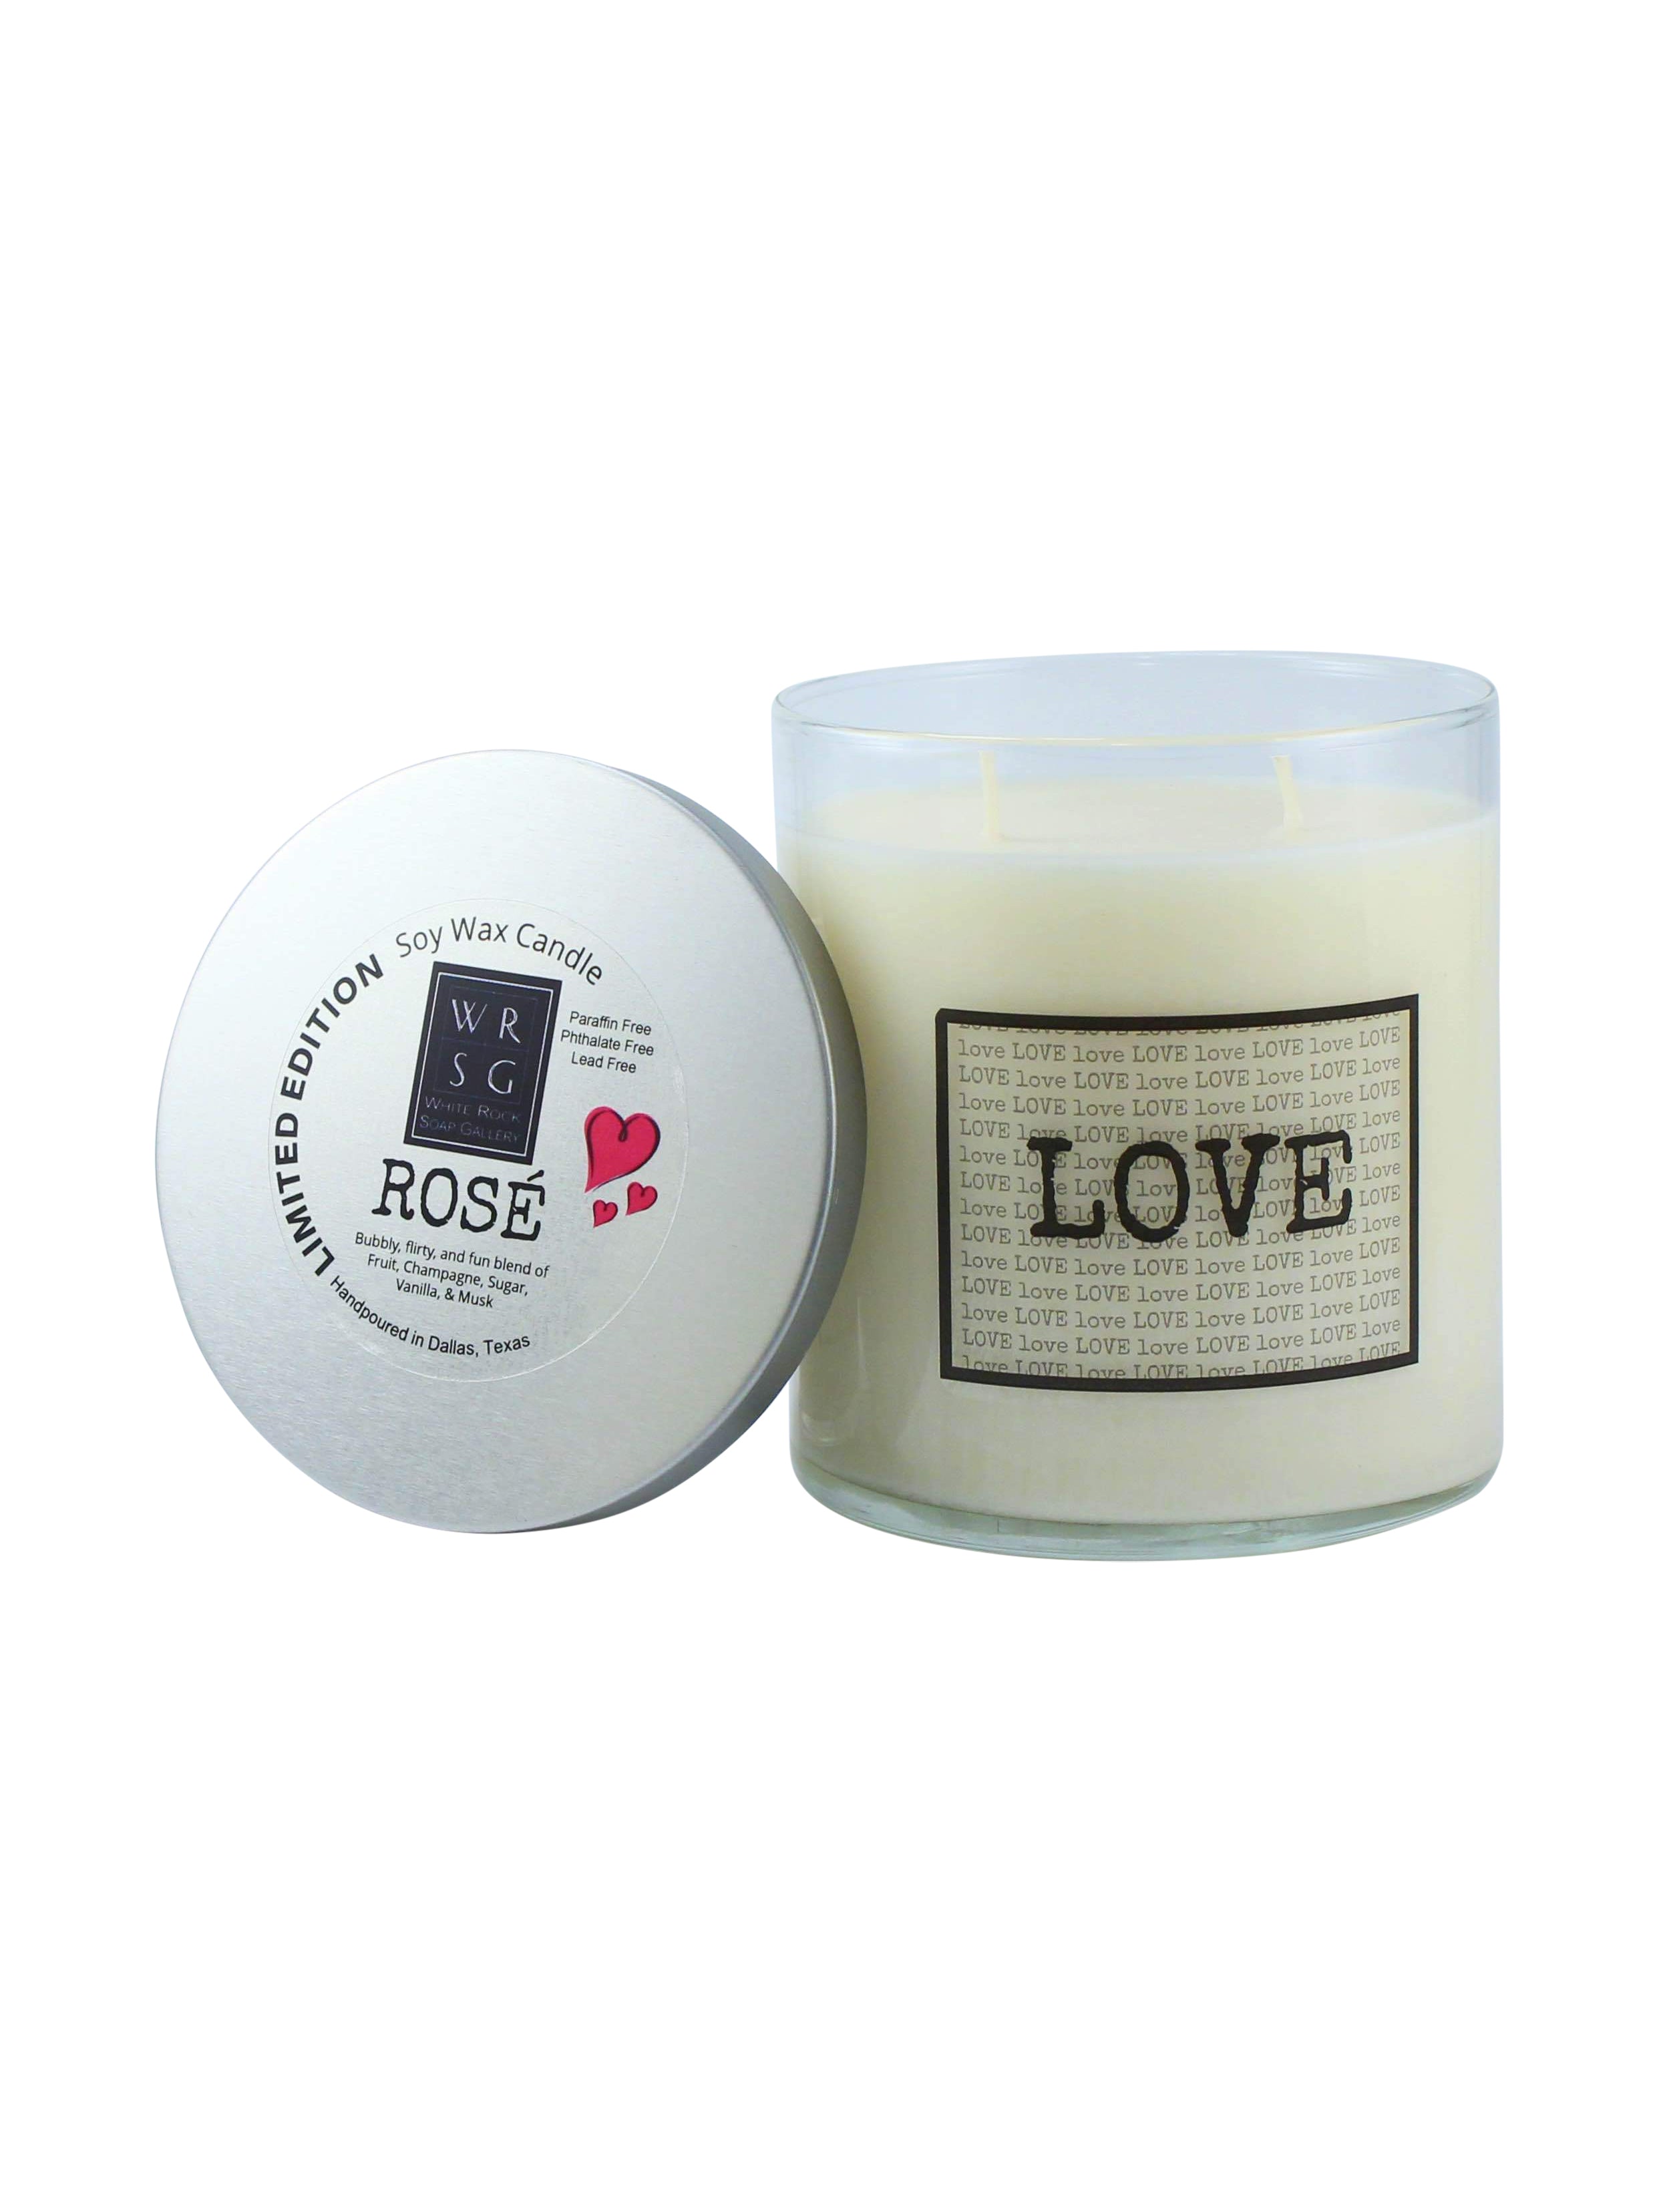 Soy Wax Candle Jar with Lid 17 oz. - Limited Edition